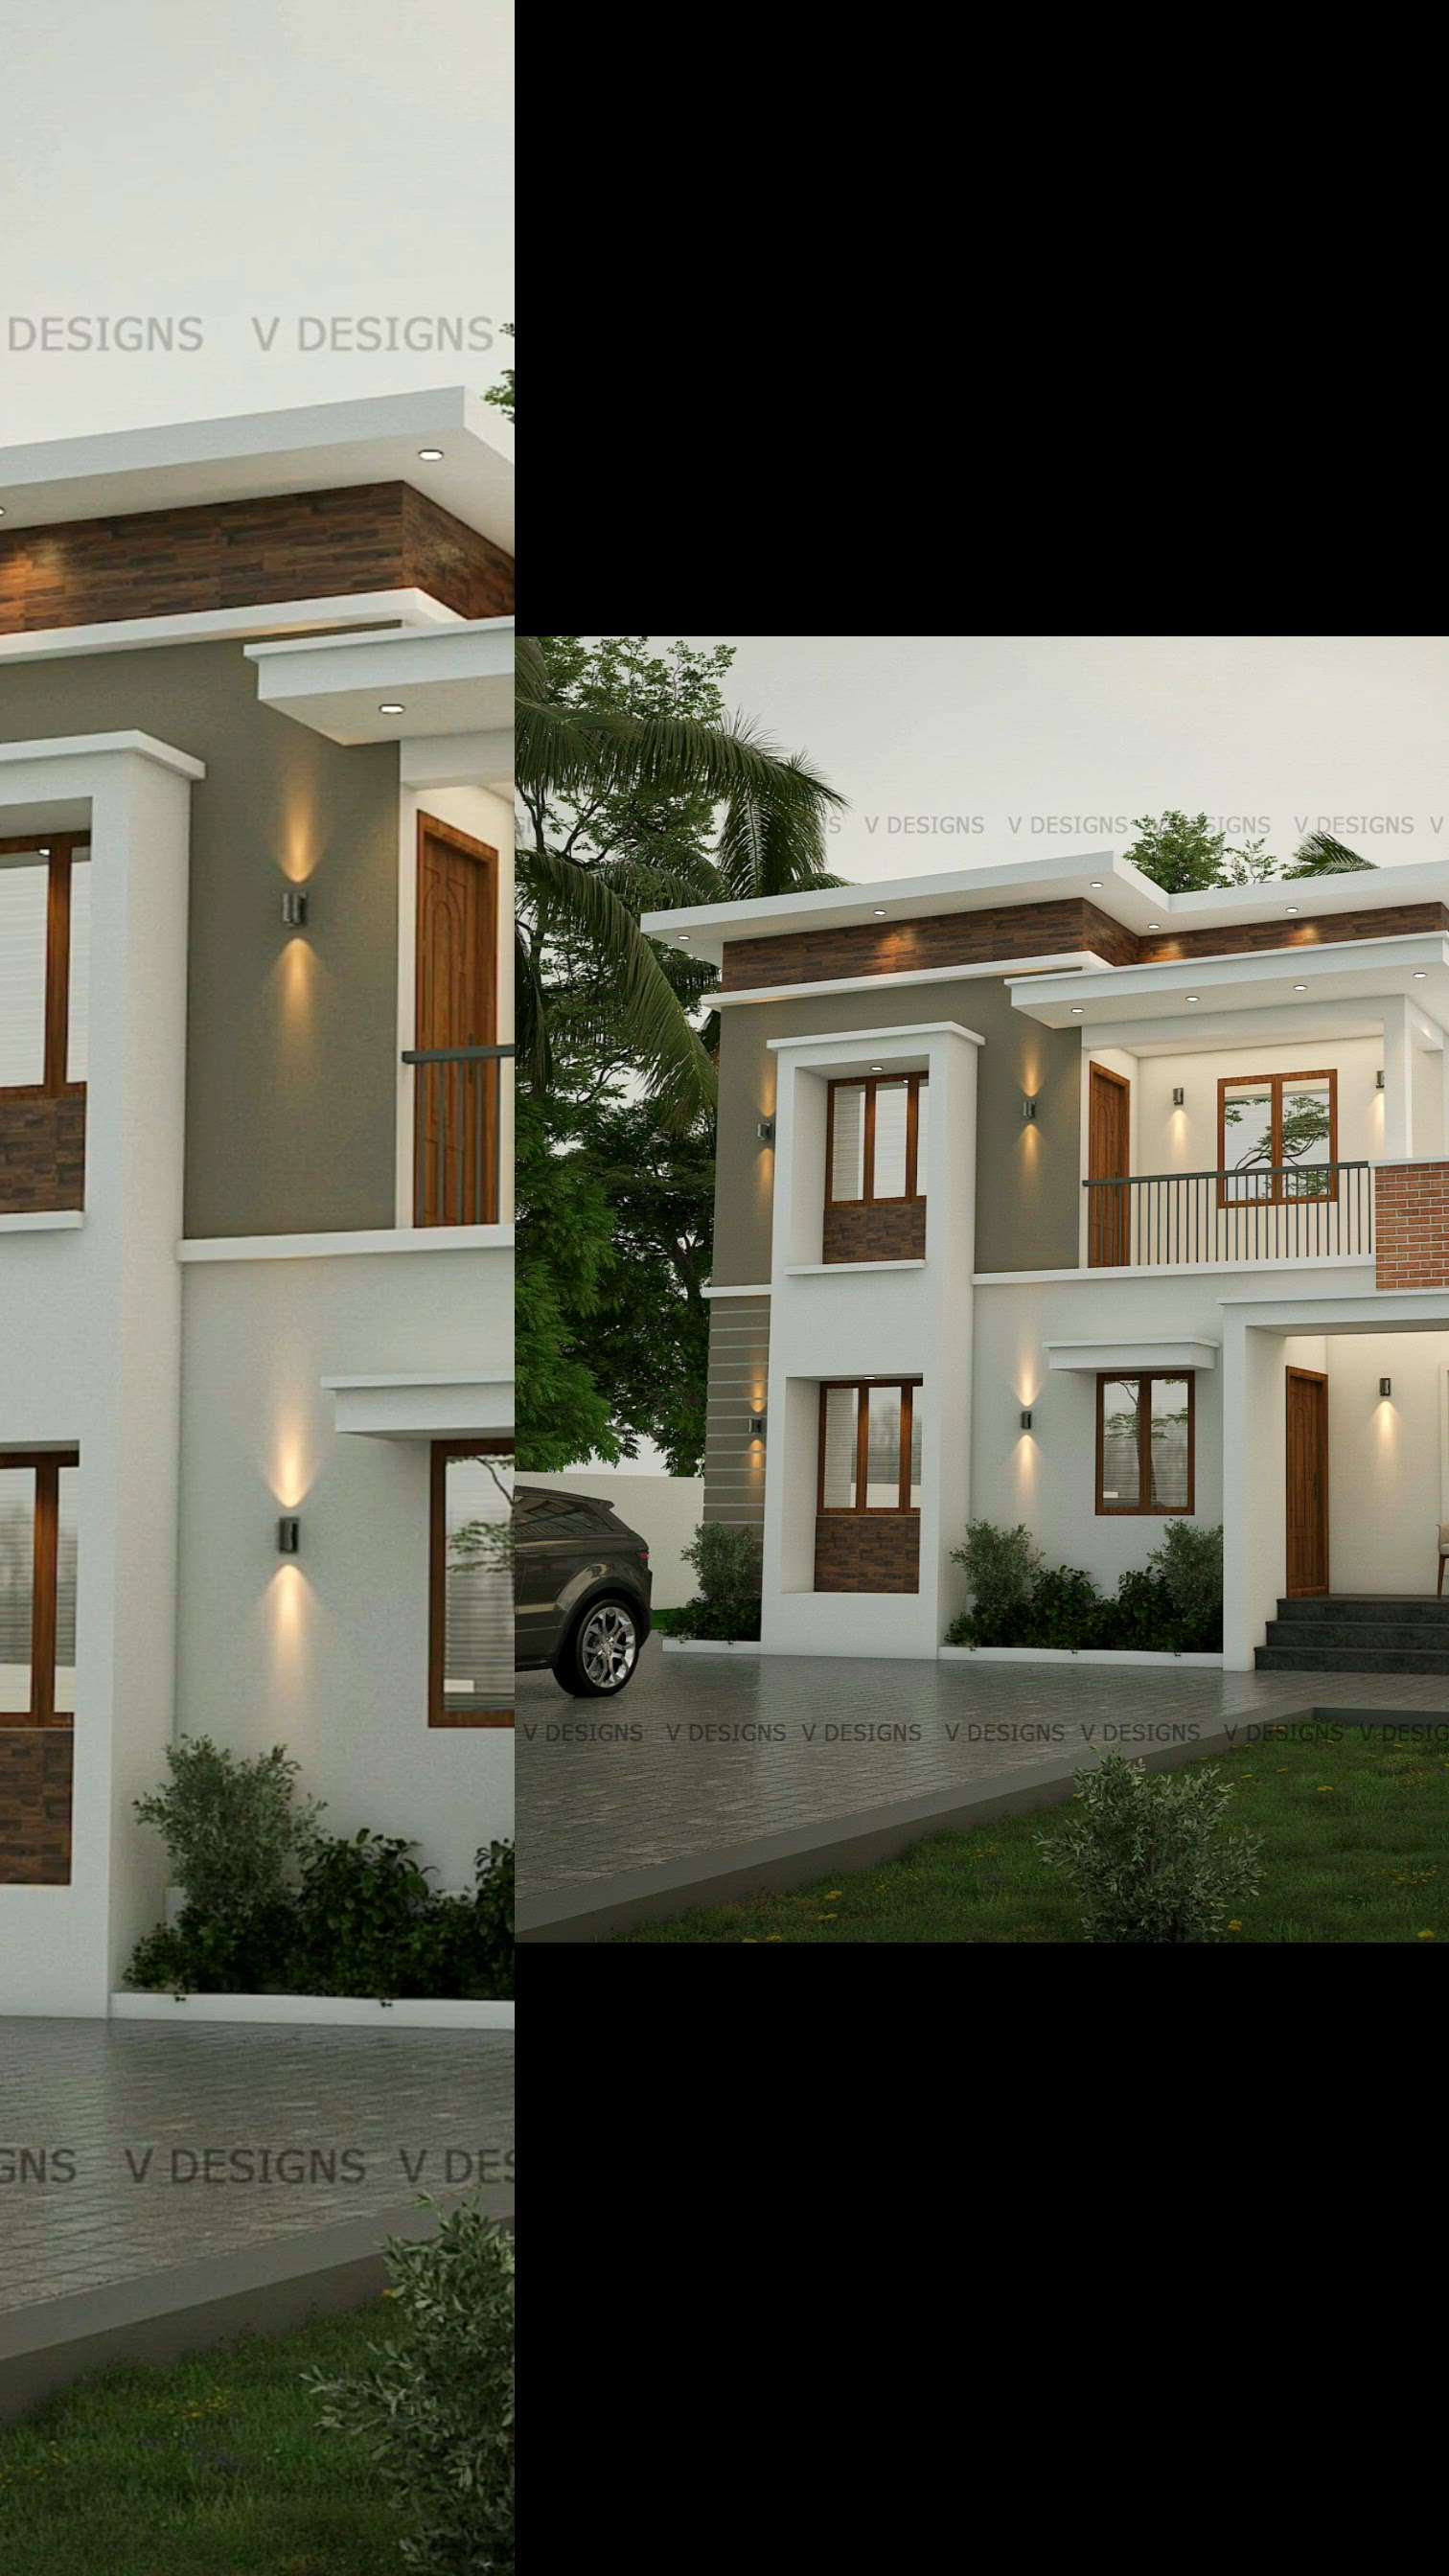 4 Bhk home Design 🏡  
All Kerala Full finish contract Available 🏠

More details please Message now ❤️

⭐️Brick ( ഇഷ്ടിക ) High quality strength aprox ₹10 or above rate brick only used.

⭐️Teak wood or wpc doors & windows
⭐️High quality steel
⭐️High quality electrical & plumbing
⭐️Flooring ₹80/Sqft
⭐️Toilet :  Branded Jaguar fittings
⭐️Water tank 1000 L capacity
⭐️Two coat Putty, one coat primer with emulsion.
⭐️Interior Wardrobs & furnishing including

Designer :
@vishnu_ravindran_v_designs_

Cleint :  Anoop , Thiruvalla. 

1700 Sqft
4 bhk 
Aprox : 60 L

. follow more 👉 @vishnu_ravindran_v_designs_

#kerala #keralahomes #keralahomedesigns
#budgethomes #budgethome
#smallhome
#contemporaryhouse
#contemporarydesigns
#homeconcept
#vanithaveedu #veedu #homeconcept #interiordesign #budgethomes #budgethome #designkerala #designerconcept #architecture #homes #homestyle #indiandesigner #indianarchitecture